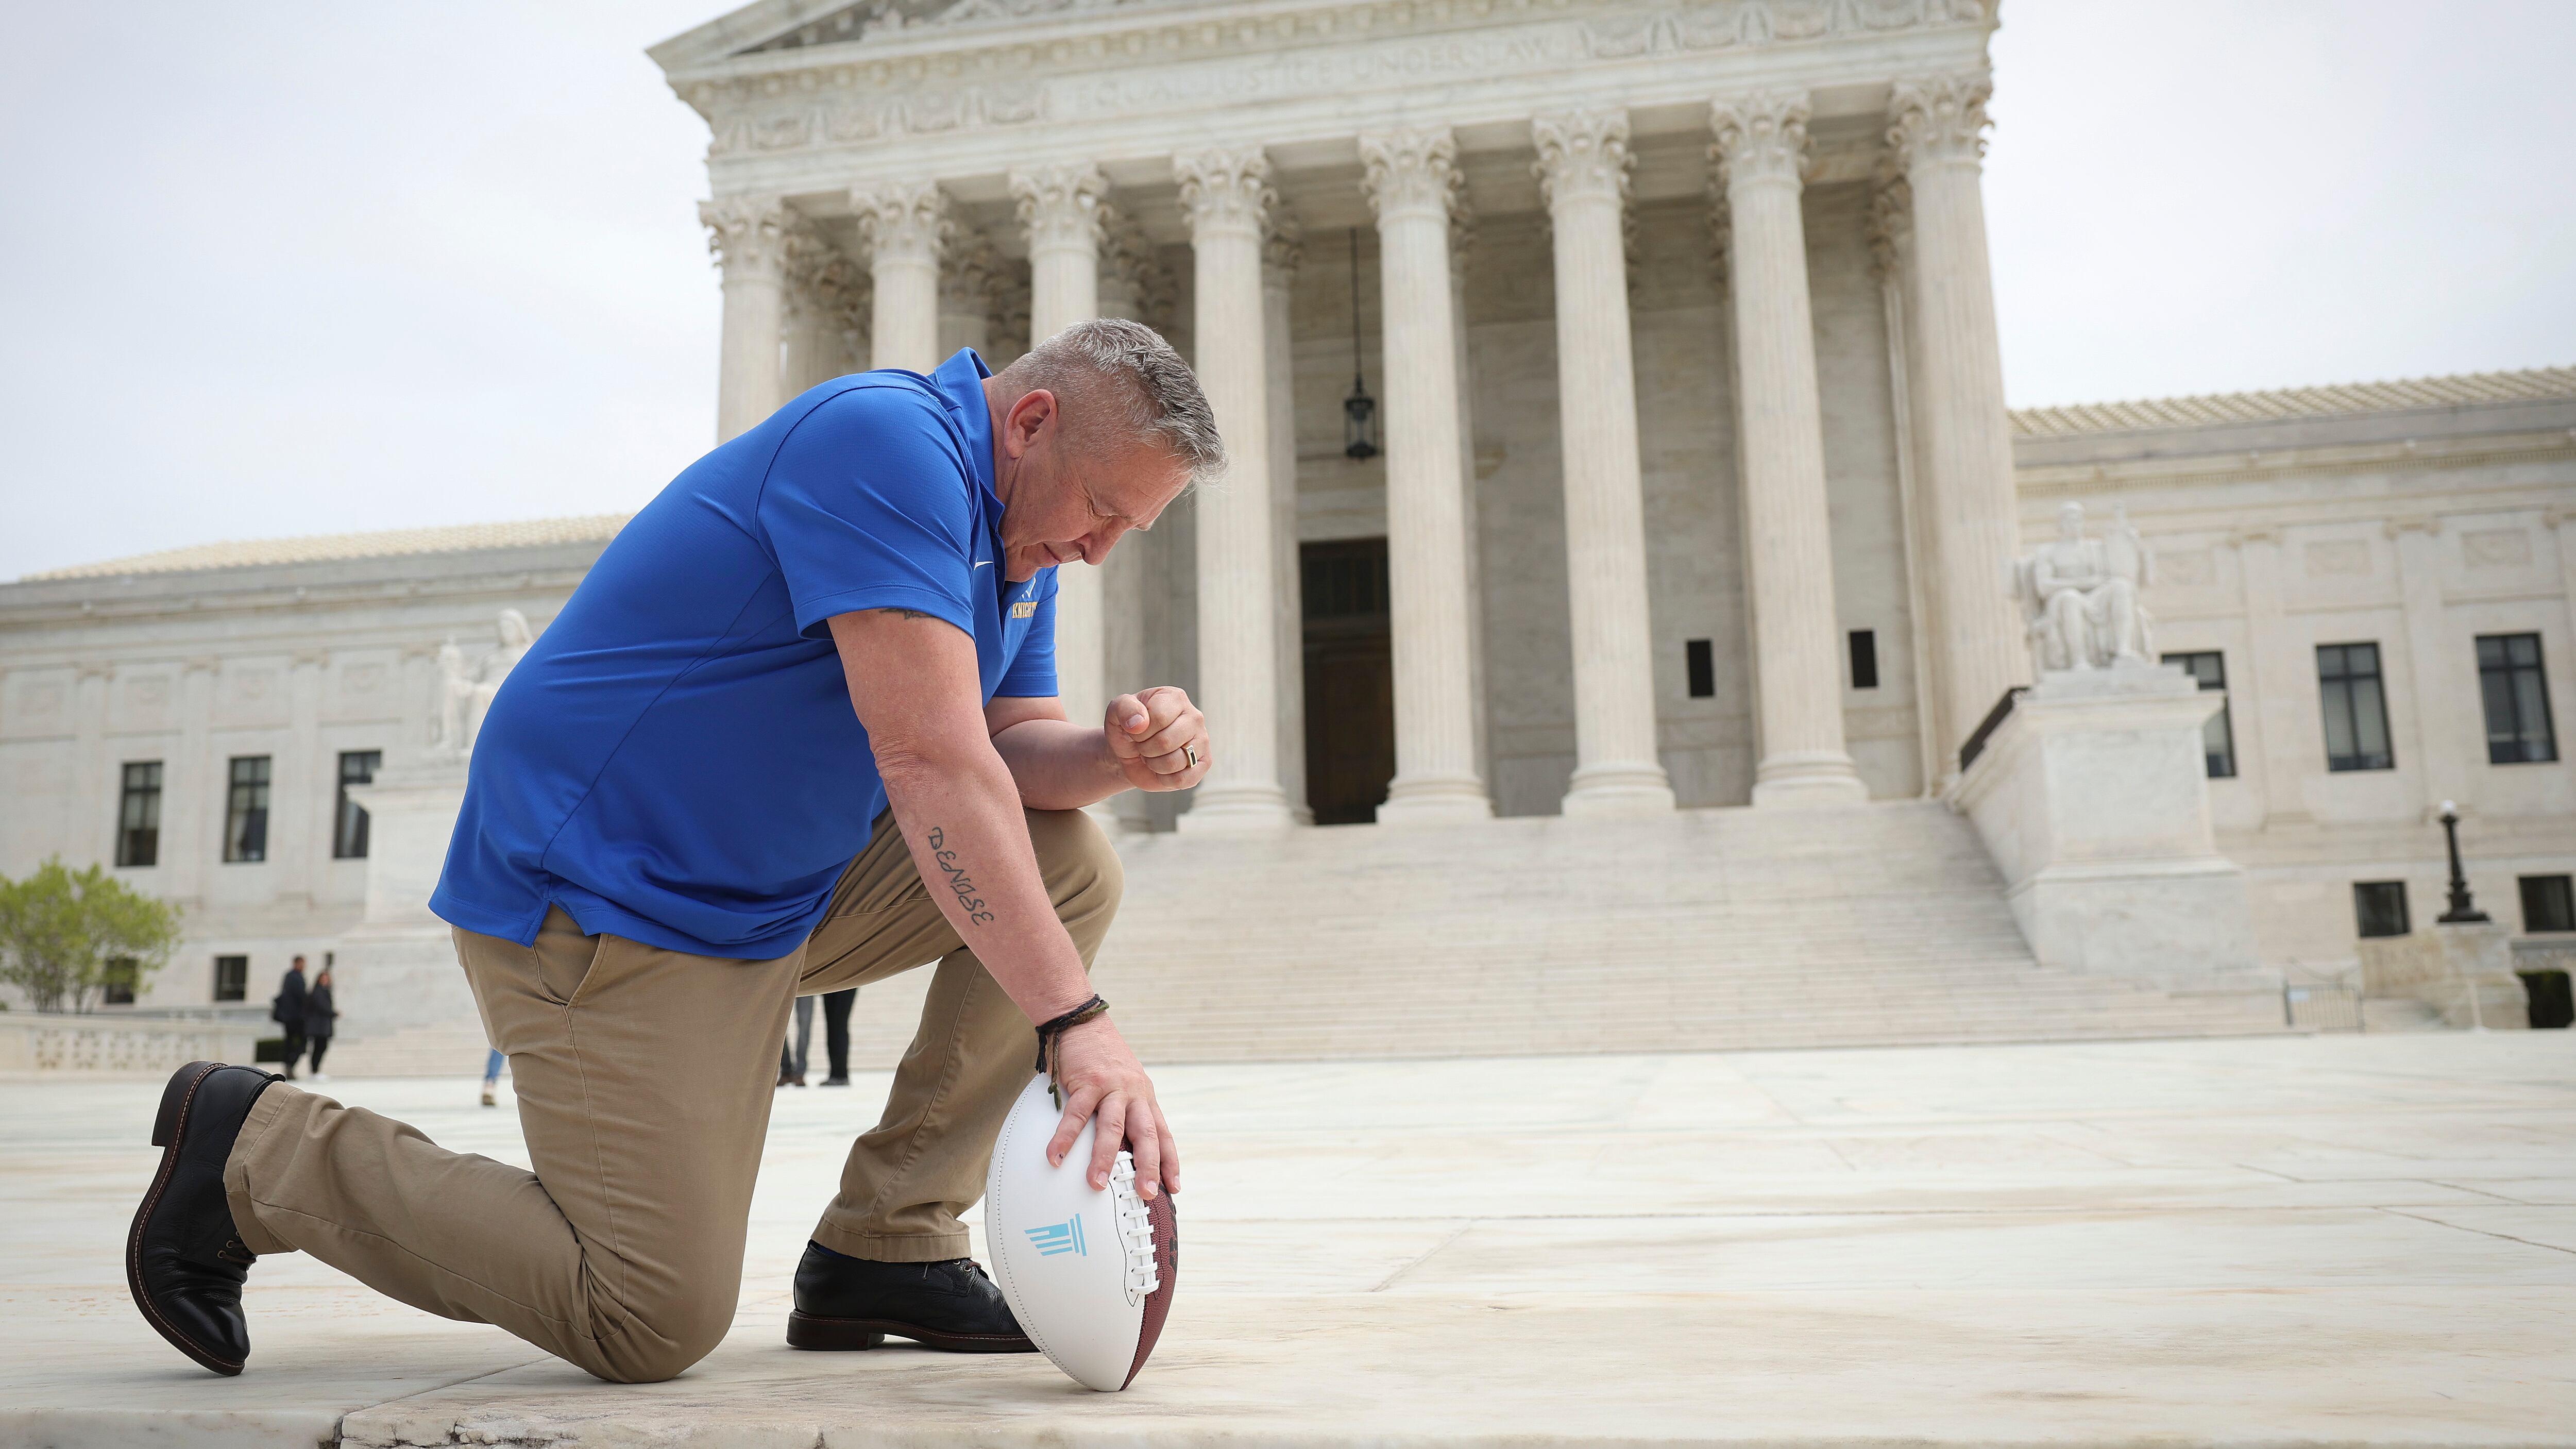 A man in a blue shirt prays in front of the United States Supreme Court building, holding a football.